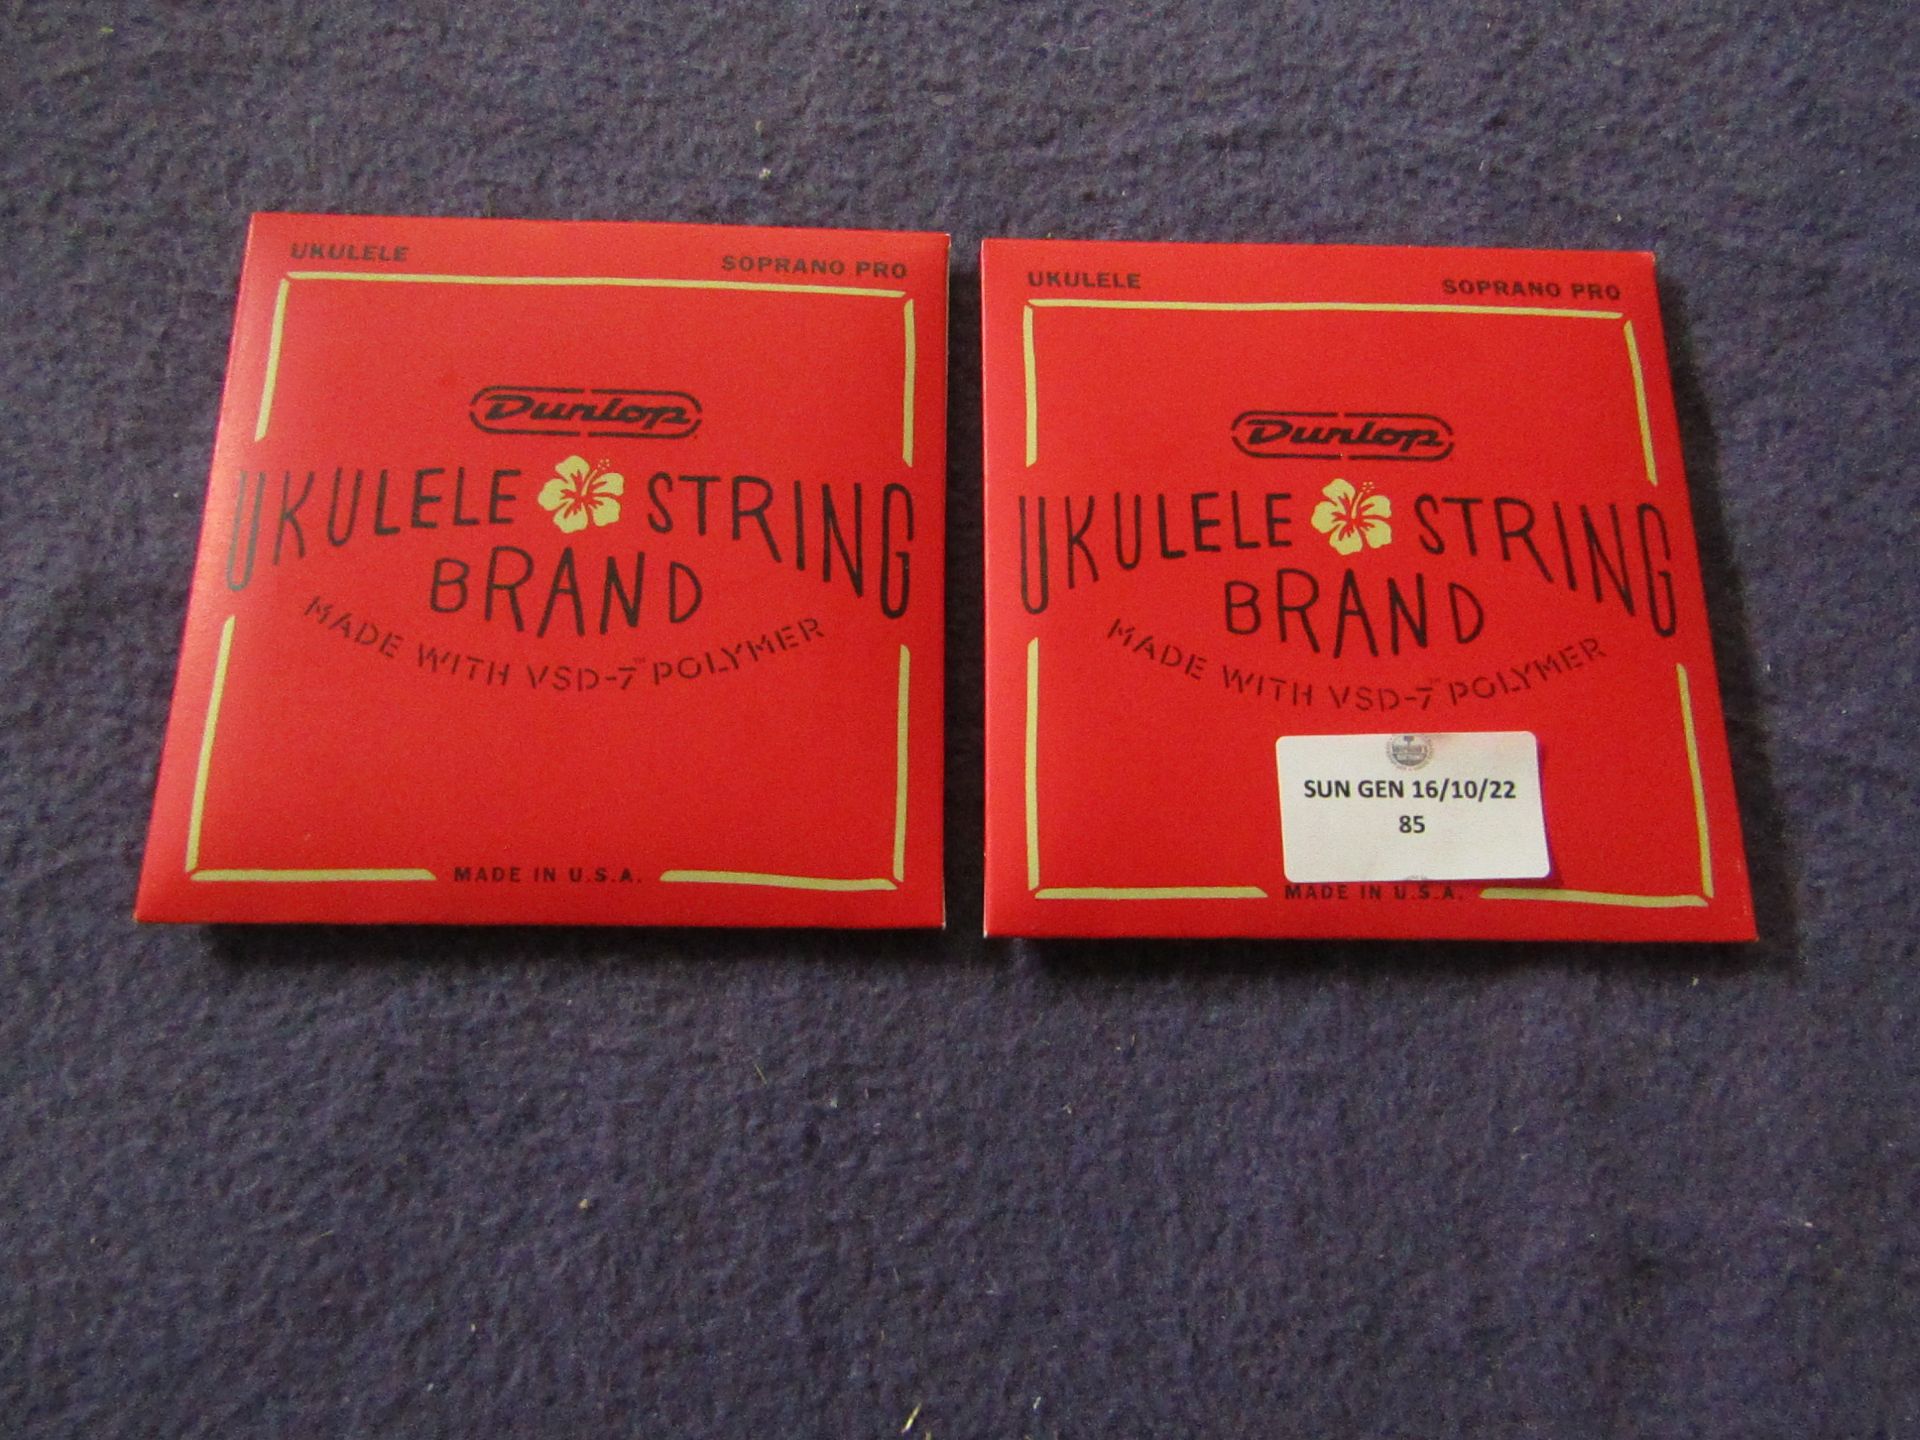 2x Dunlop - Soprano Pro Ukulele String ( DUQ301 ) - Unchecked & Packaged.